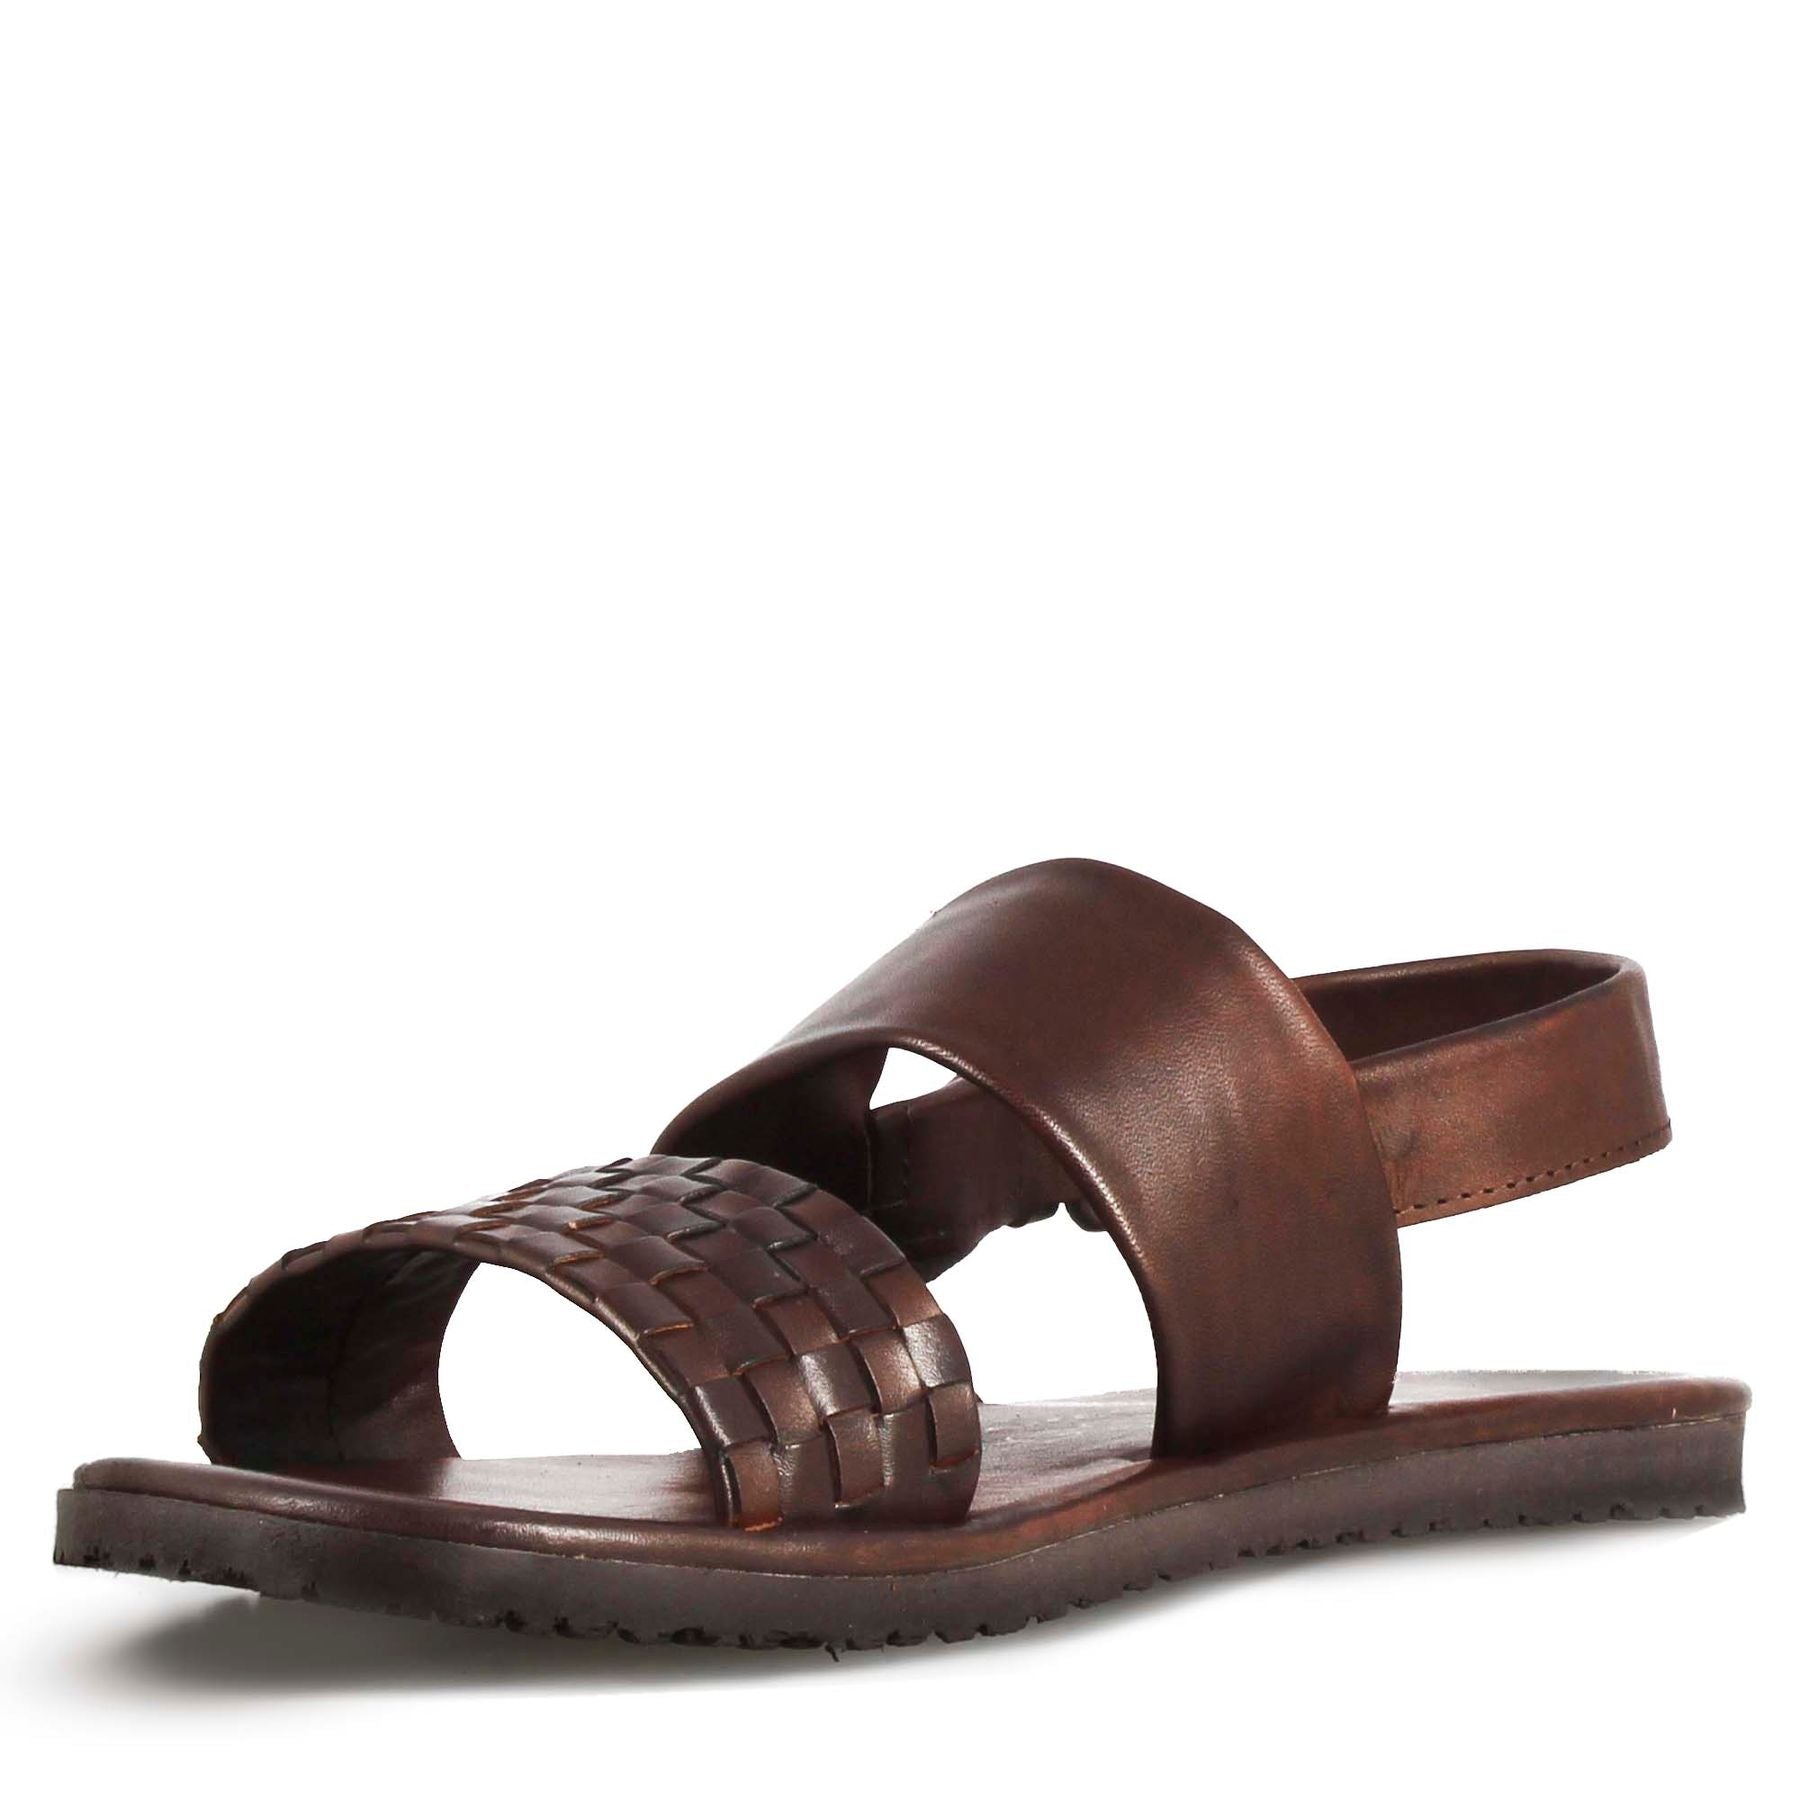 Men's sandal with brown semi-braided leather buckle